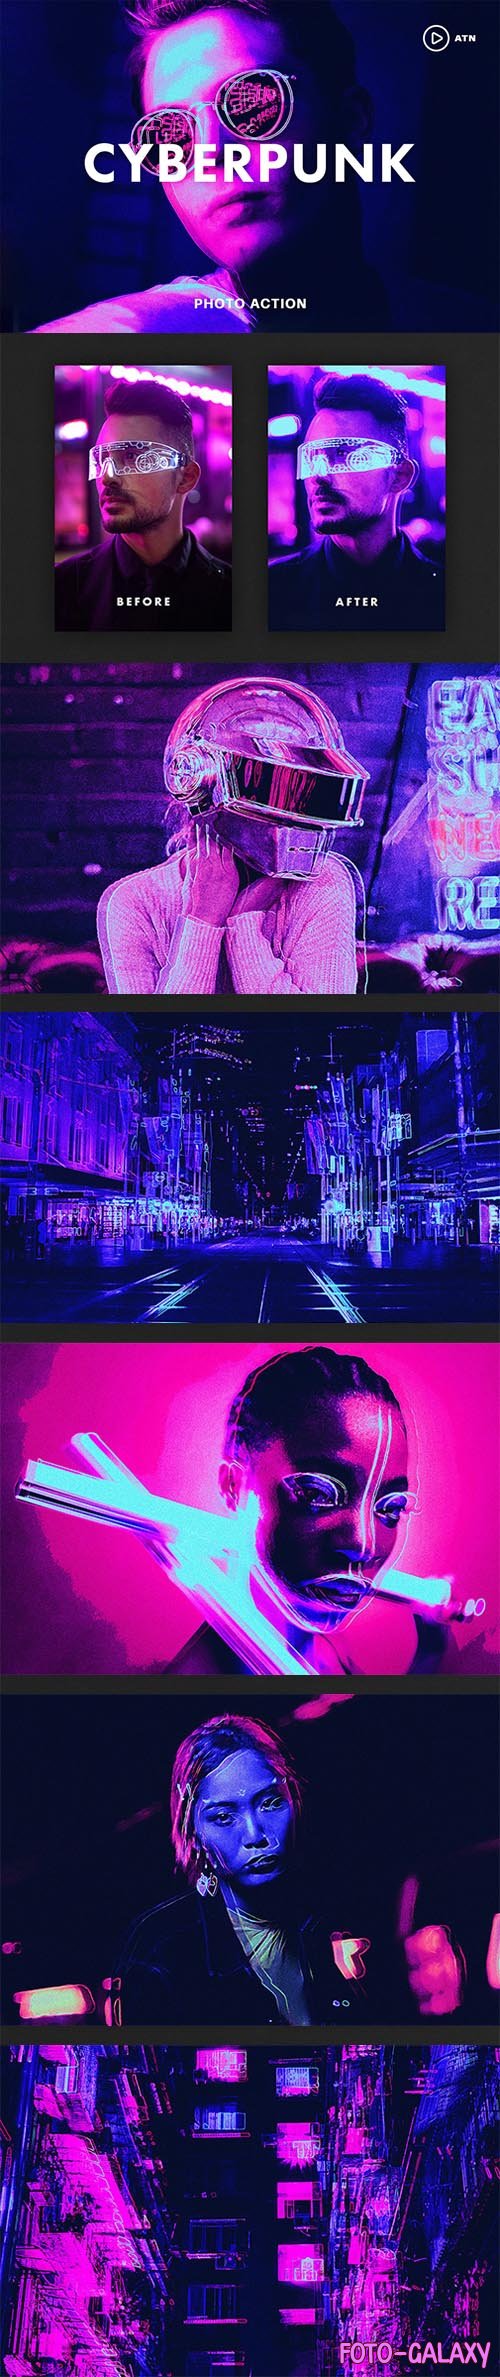 Cyberpunk Photo Actions & Gradients for Photoshop